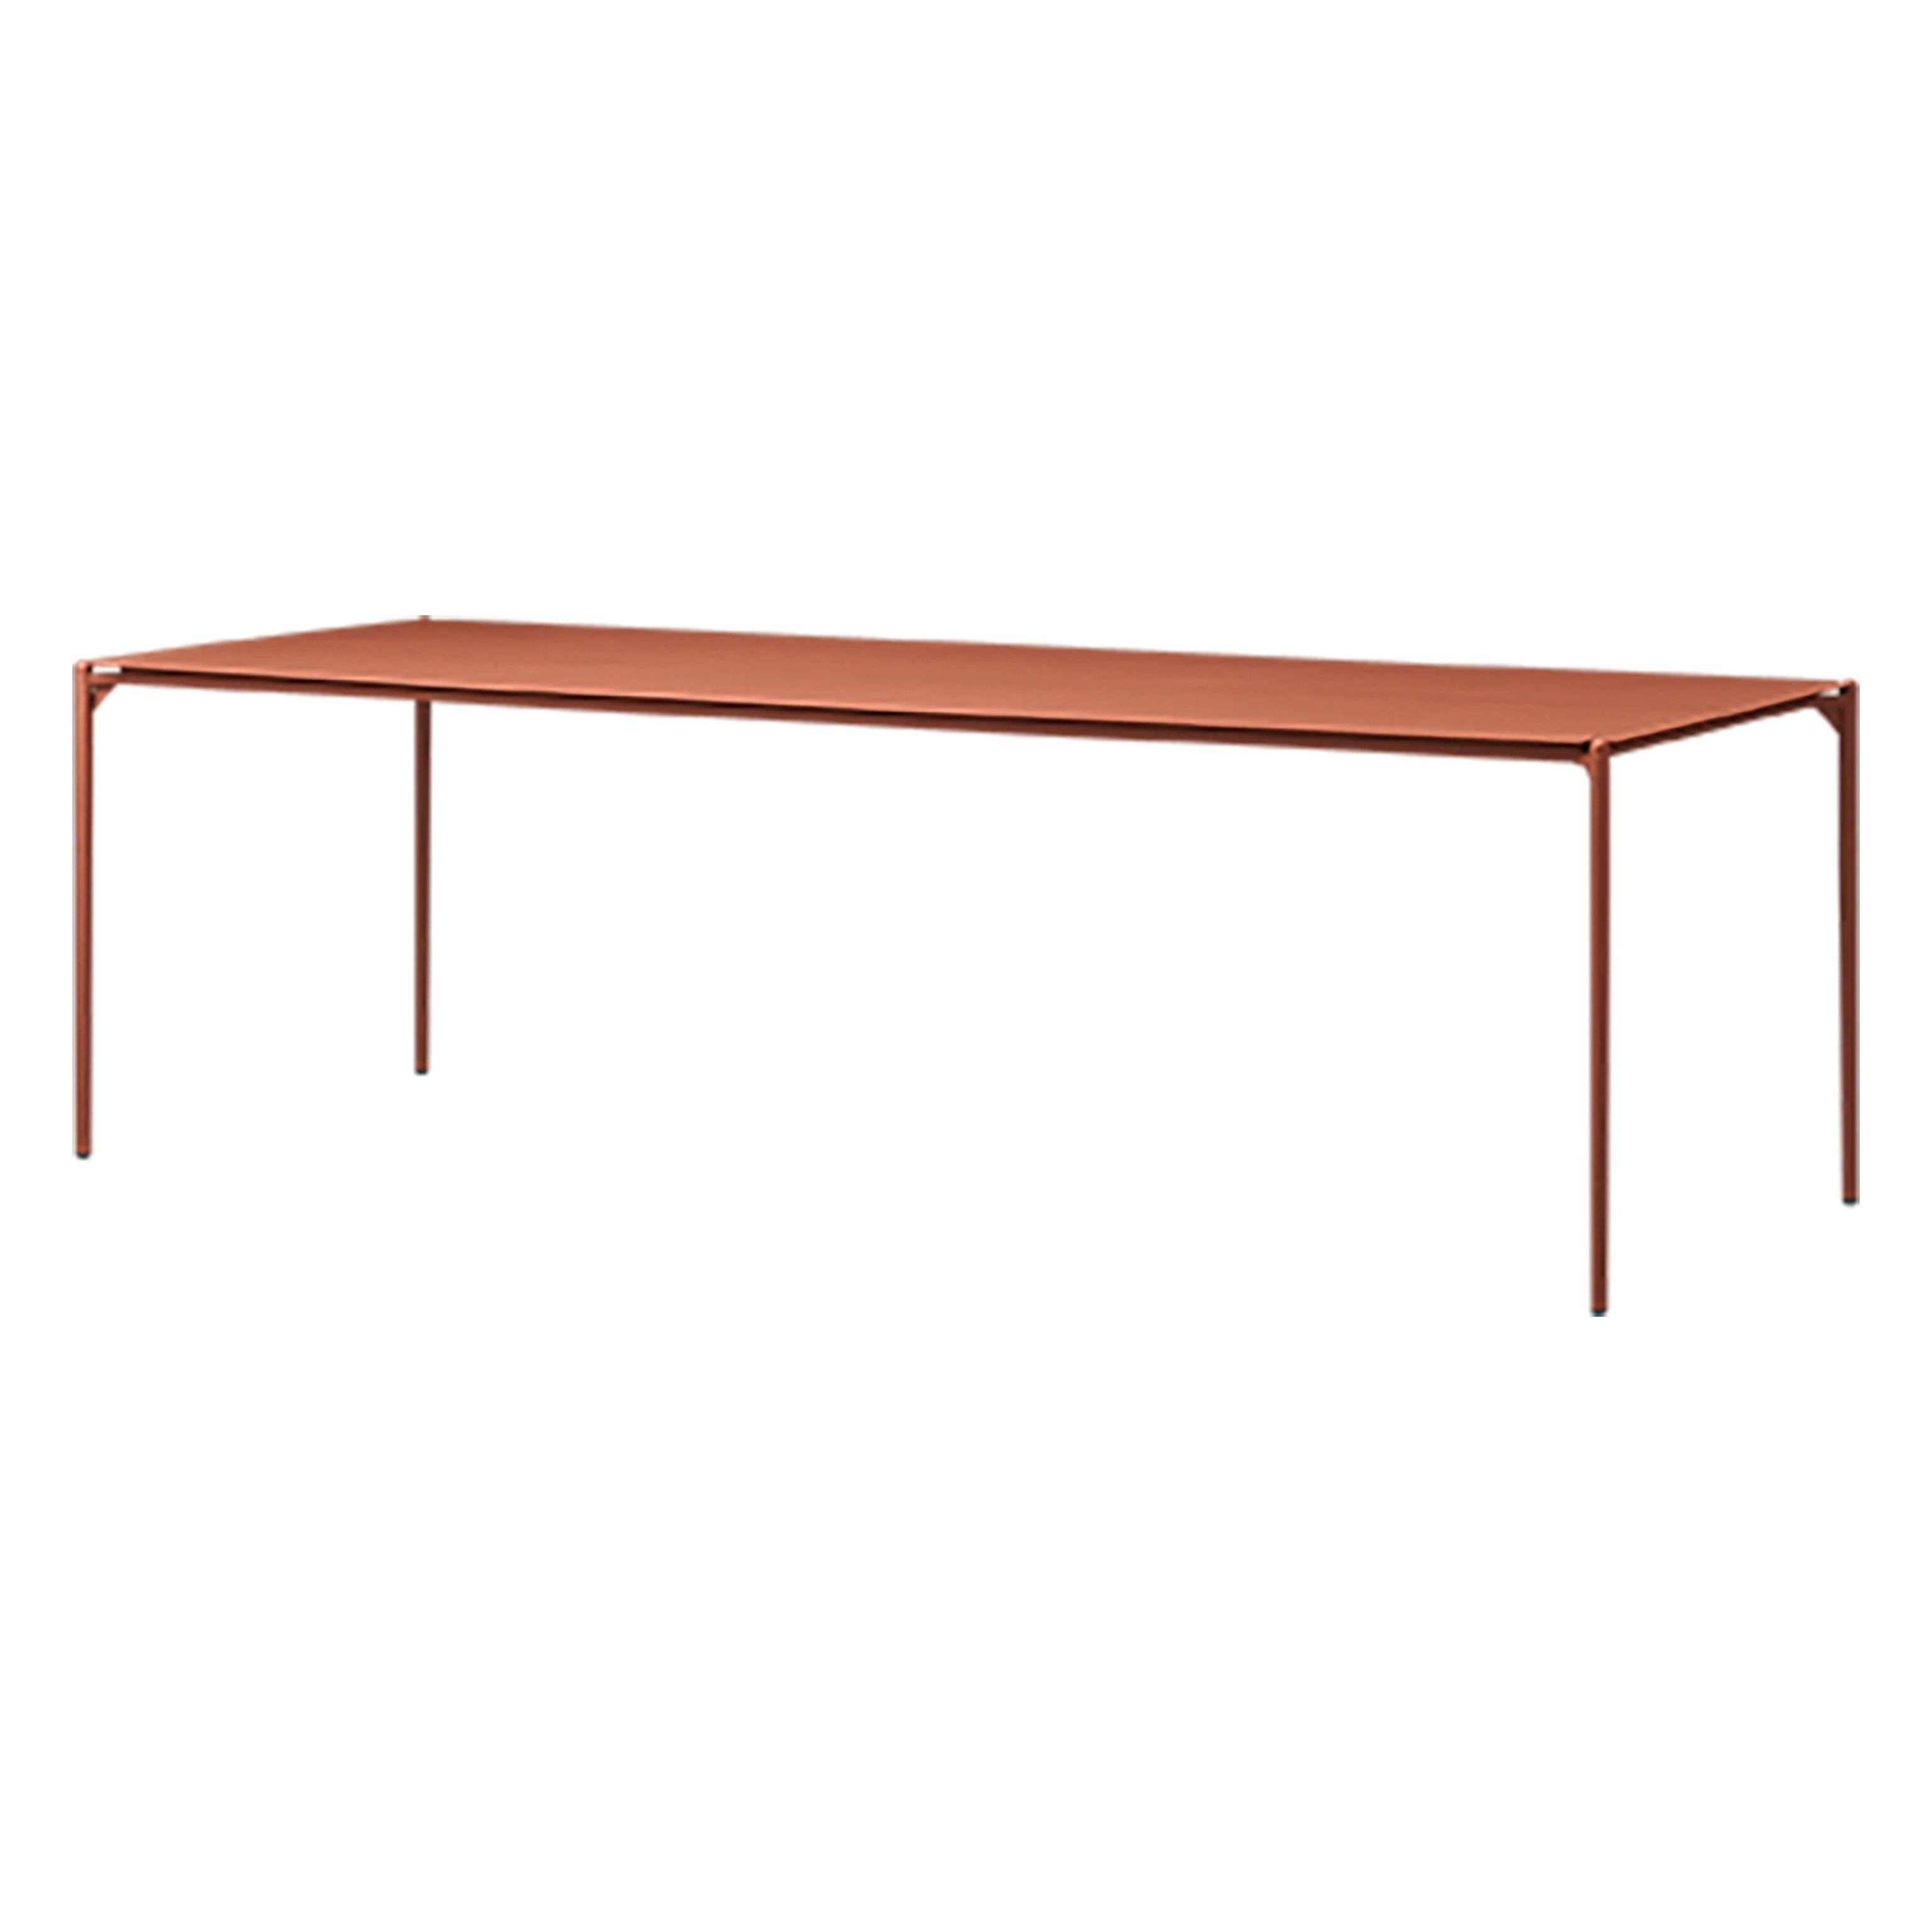 Large ginger bread Minimalist table
Dimensions: D 240 x W 90 x H 72 cm 
Materials: Steel w. matte powder coating & aluminum w. matte powder coating.
Available in colors: Taupe, bordeaux, forest, ginger bread, black and, black and gold.


Bring